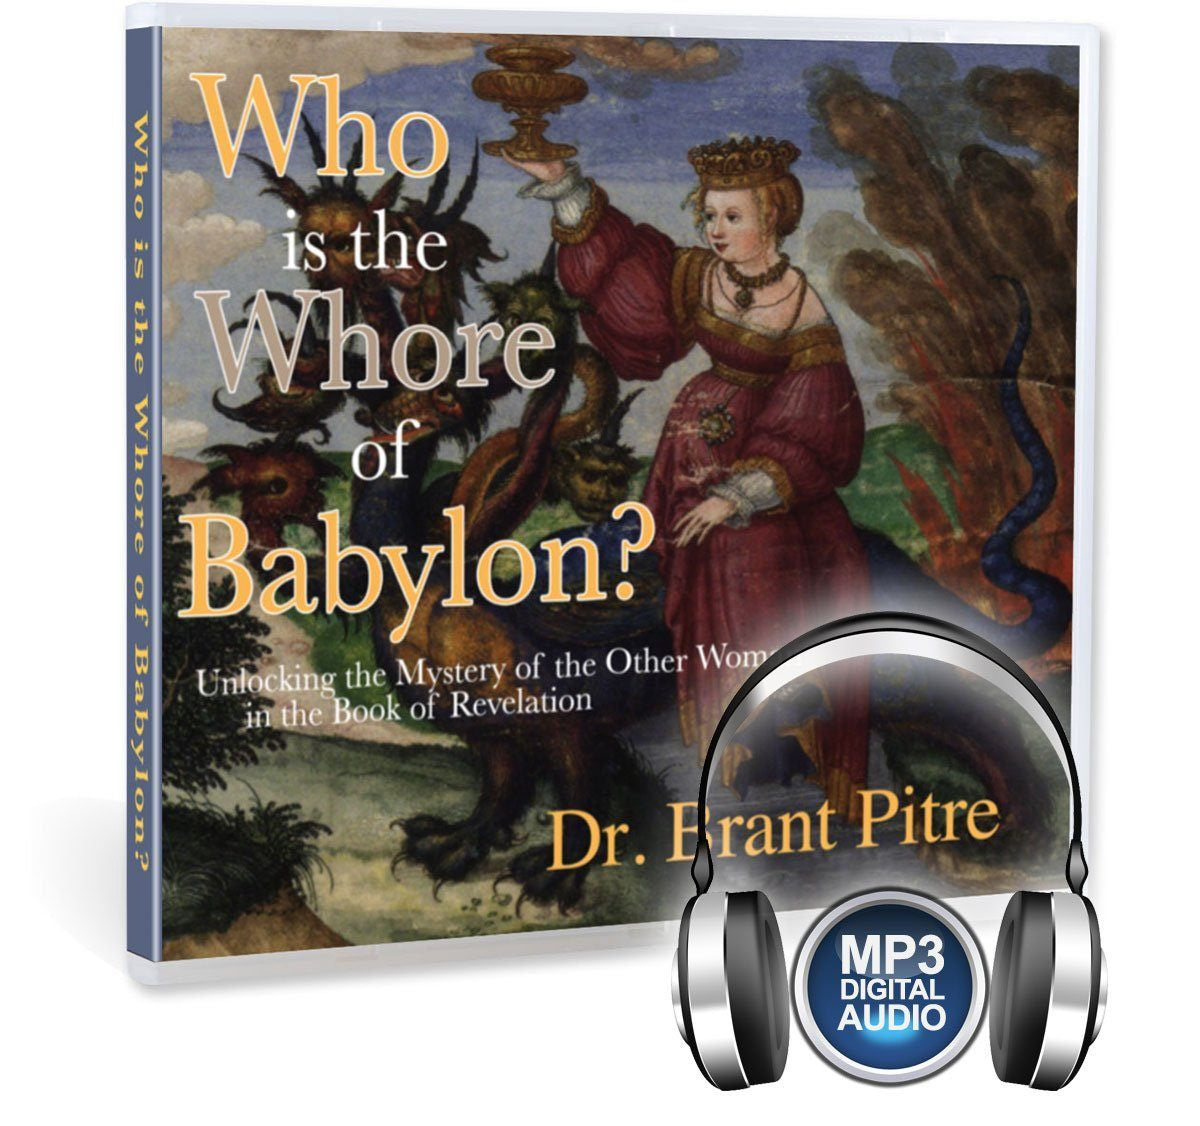 Who is the famous "Whore of Babylon" in the book of revelation?  Many protestants claim it's the Roman Catholic Church or the city of Rome, but is that what Saint John himself says in the book of Revelation? (CD)